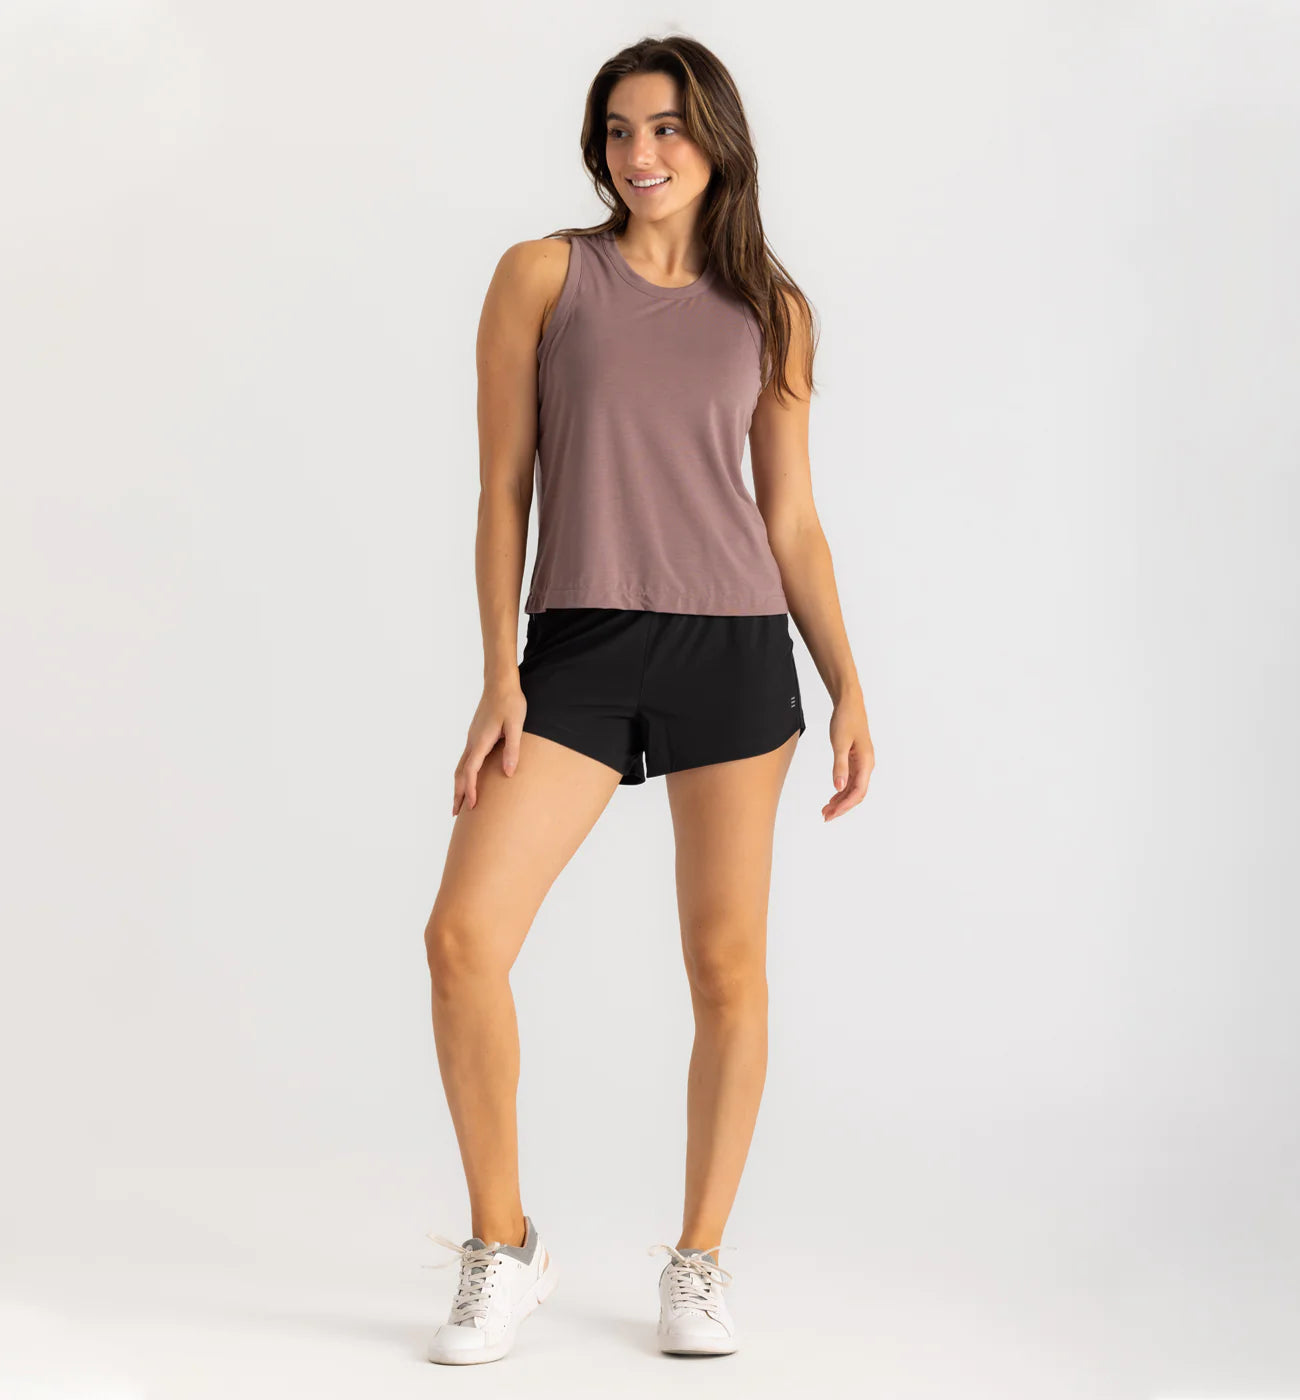 Freefly Women's Bamboo-Lined Active Breeze Short 3"